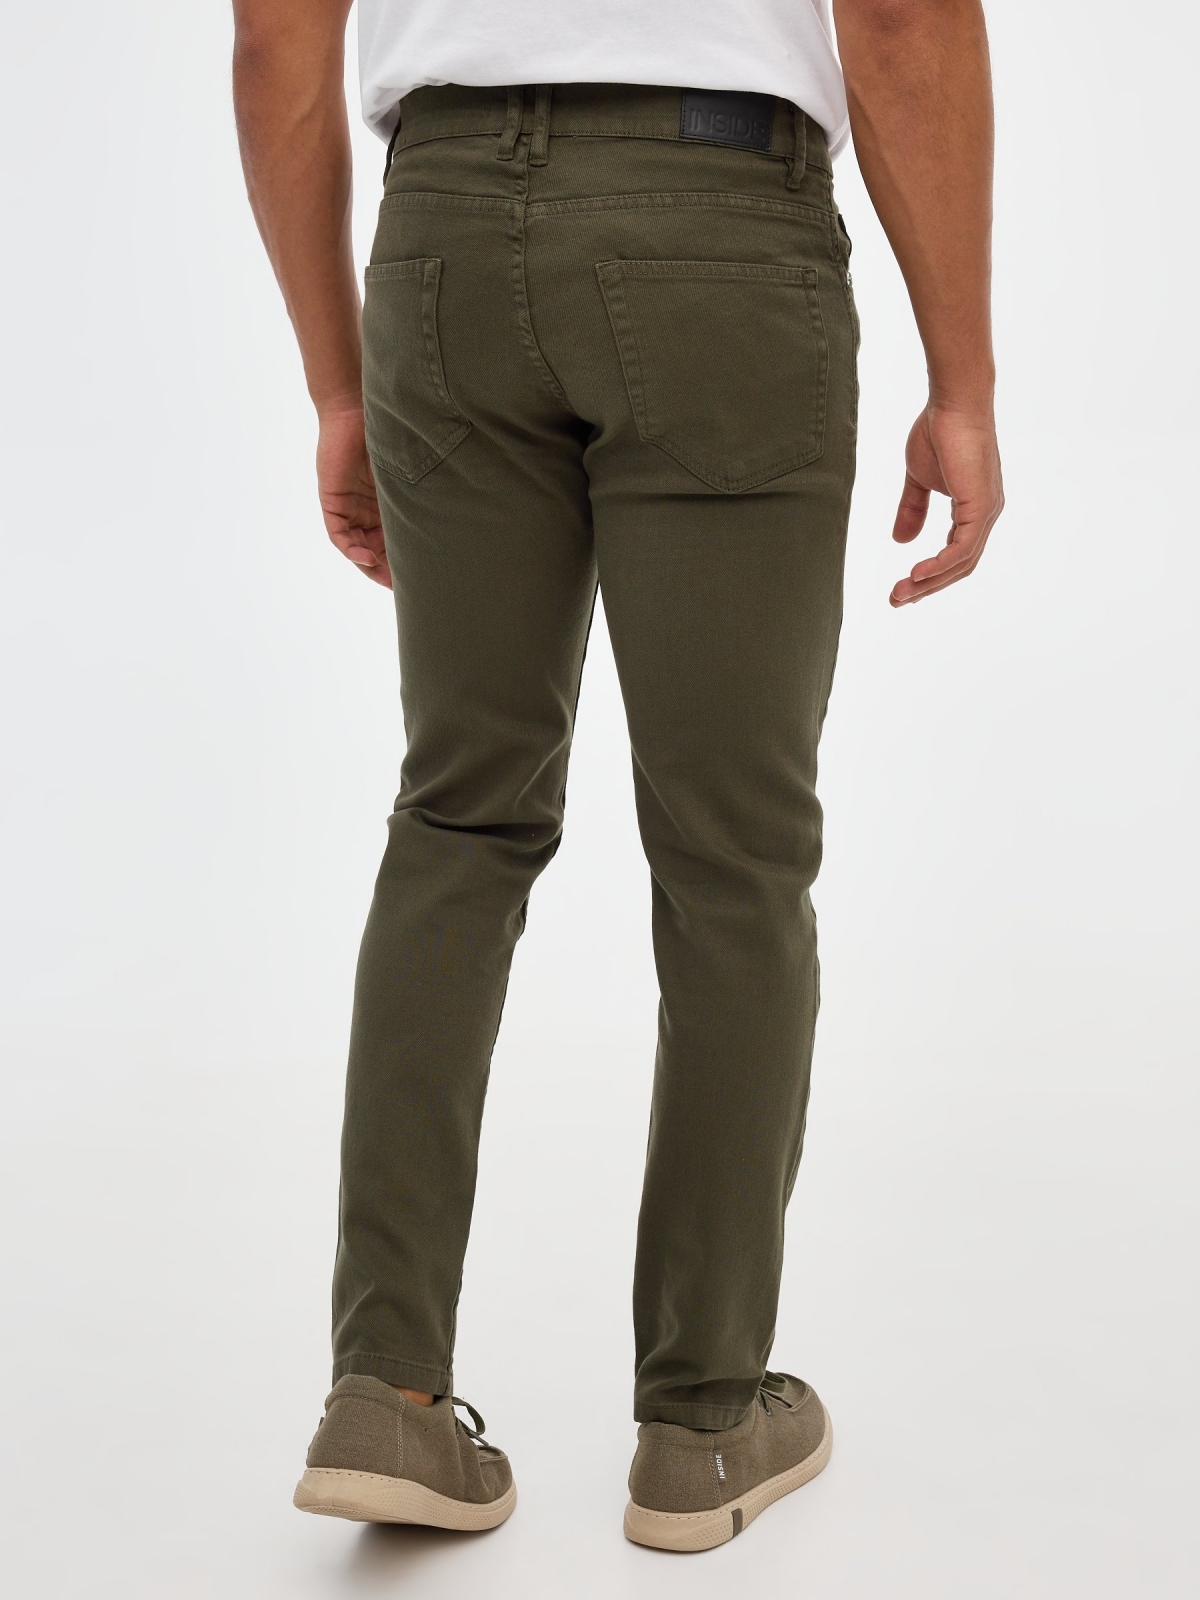 Camel slim jeans green middle back view